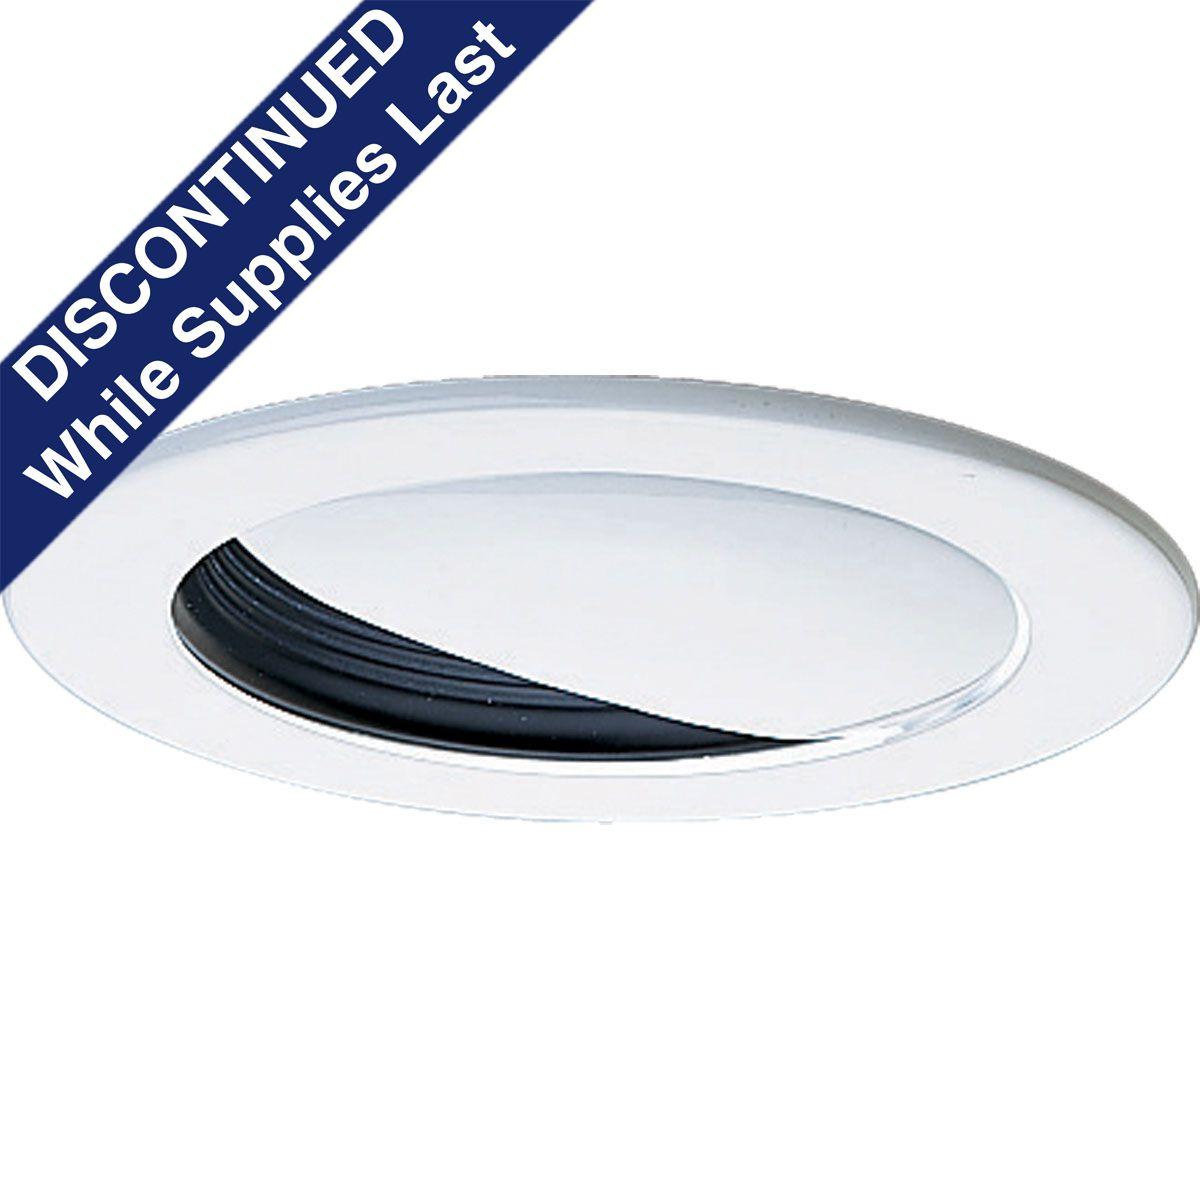 Hubbell P8045-31 4" Wall Washer trim in a Black finish with bright white powdered painted metal flange and eyelid. All trims have 360 positioning. Lamps tilt 30 max. 5" outside diameter.  ; Black finish. ; Bright white powdered painted metal flange. ; Bright white painted